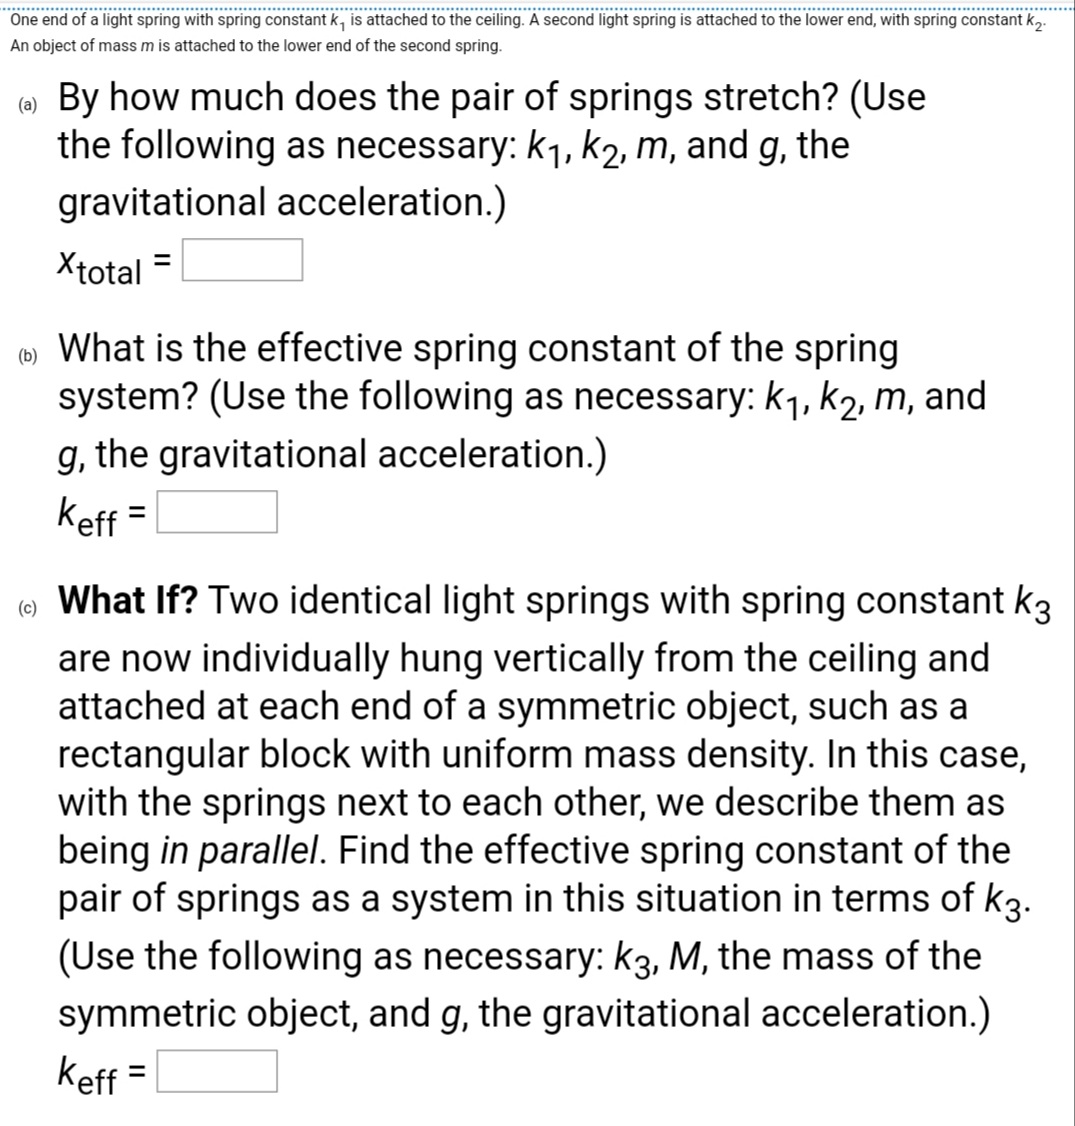 ****..
*****......
...*******
...............
One end of a light spring with spring constant k, is attached to the ceiling. A second light spring is attached to the lower end, with spring constant k,.
An object of mass m is attached to the lower end of the second spring.
() By how much does the pair of springs stretch? (Use
the following as necessary: k1, k2, m, and g, the
gravitational acceleration.)
Xtotal
%3D
m) What is the effective spring constant of the spring
system? (Use the following as necessary: k1, k2, m, and
g, the gravitational acceleration.)
Keff
What If? Two identical light springs with spring constant k3
(c)
are now individually hung vertically from the ceiling and
attached at each end of a symmetric object, such as a
rectangular block with uniform mass density. In this case,
with the springs next to each other, we describe them as
being in parallel. Find the effective spring constant of the
pair of springs as a system in this situation in terms of k3.
(Use the following as necessary: k3, M, the mass of the
symmetric object, and g, the gravitational acceleration.)
Keff =
